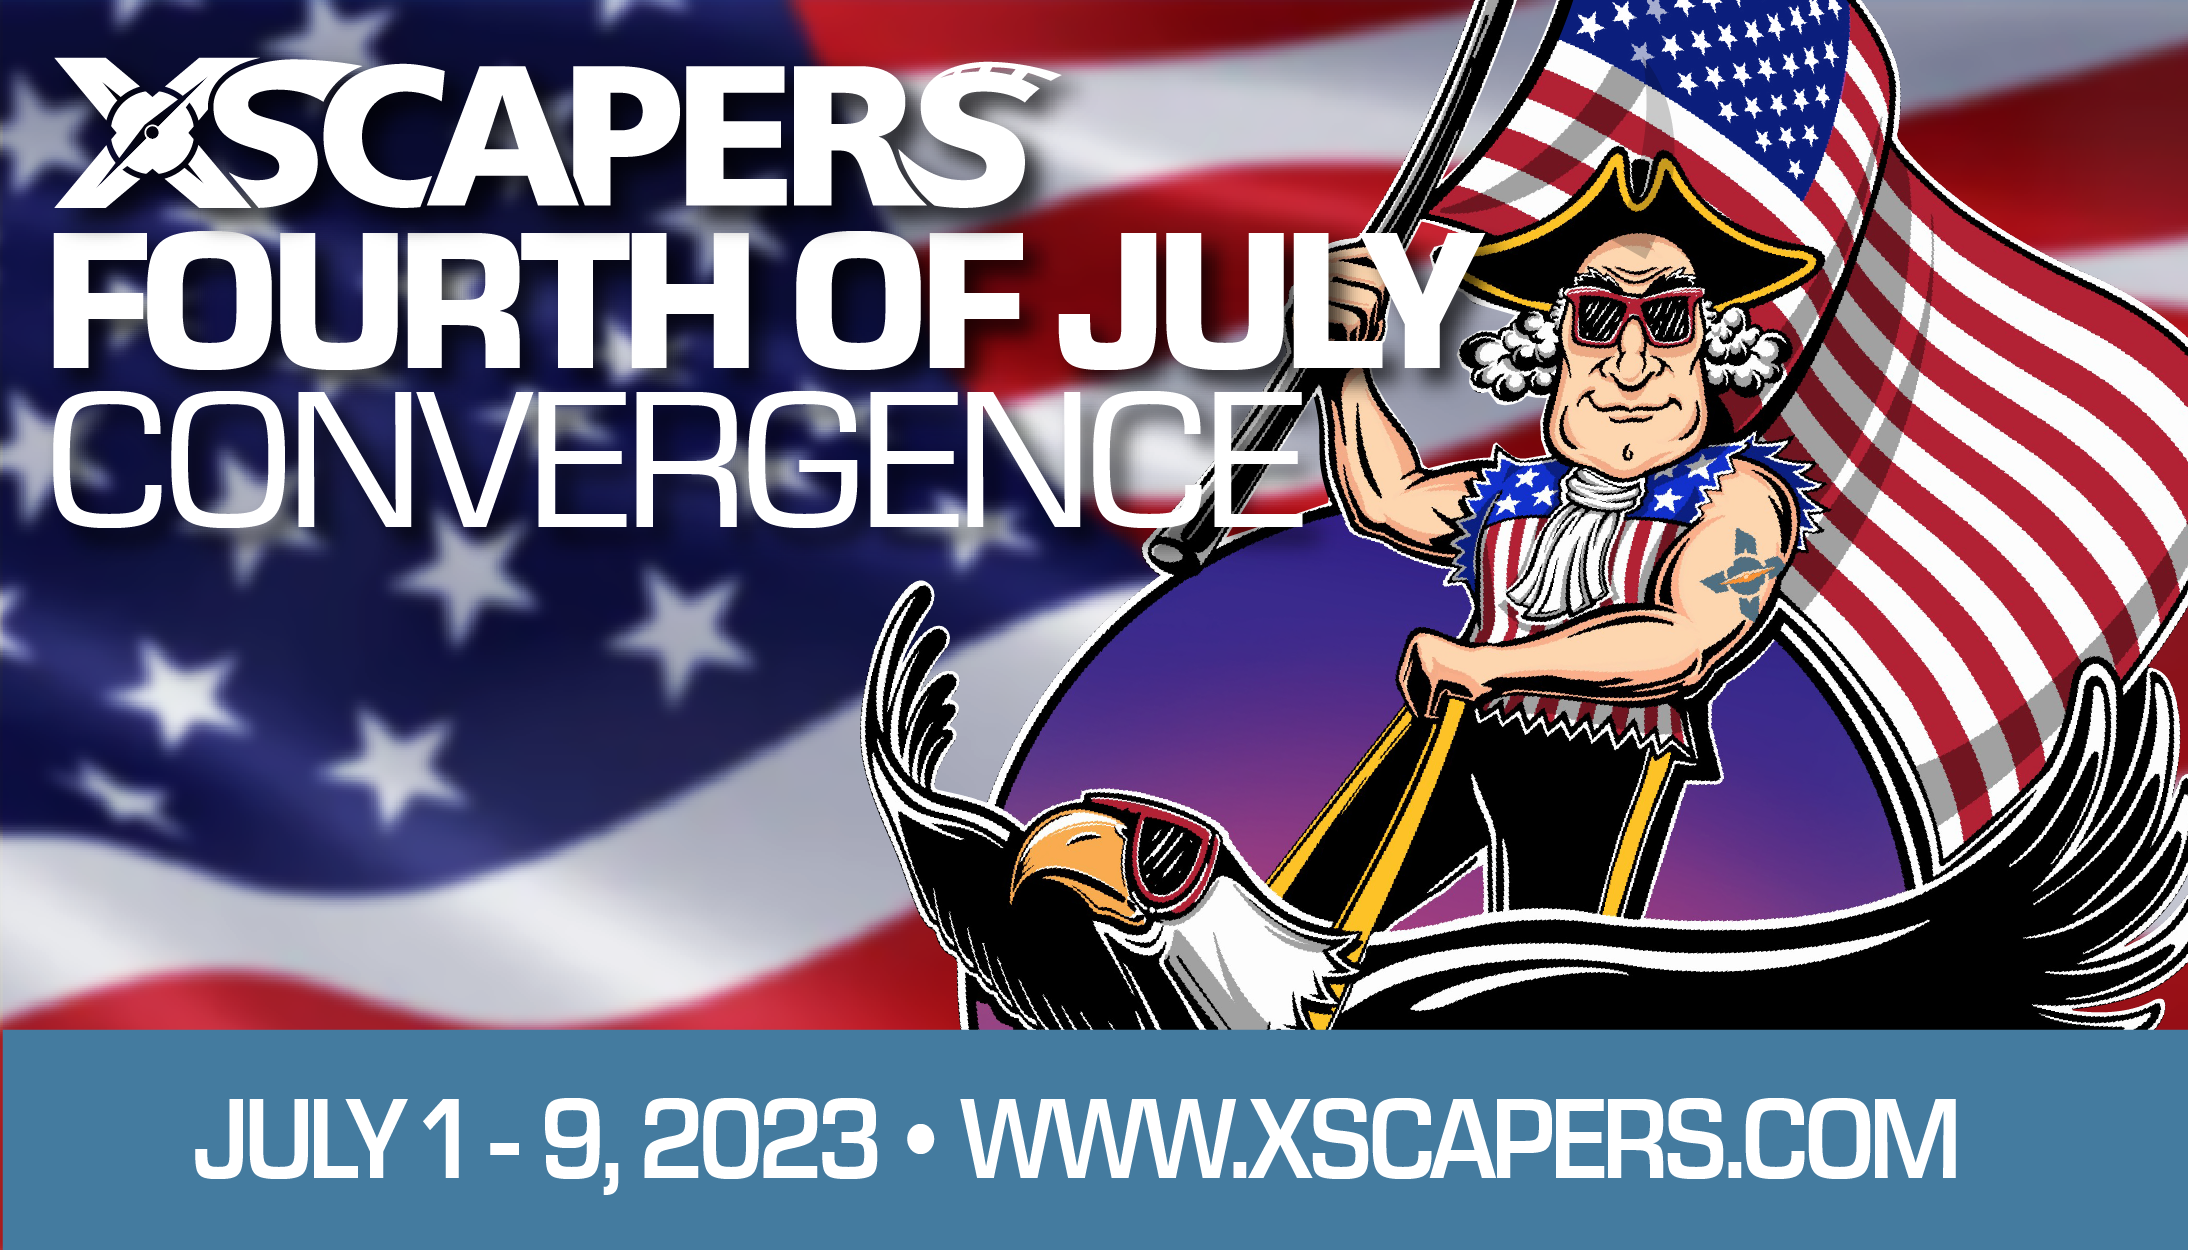 Xscapers 4th of July Convergence 2023 - SOLD OUT 1